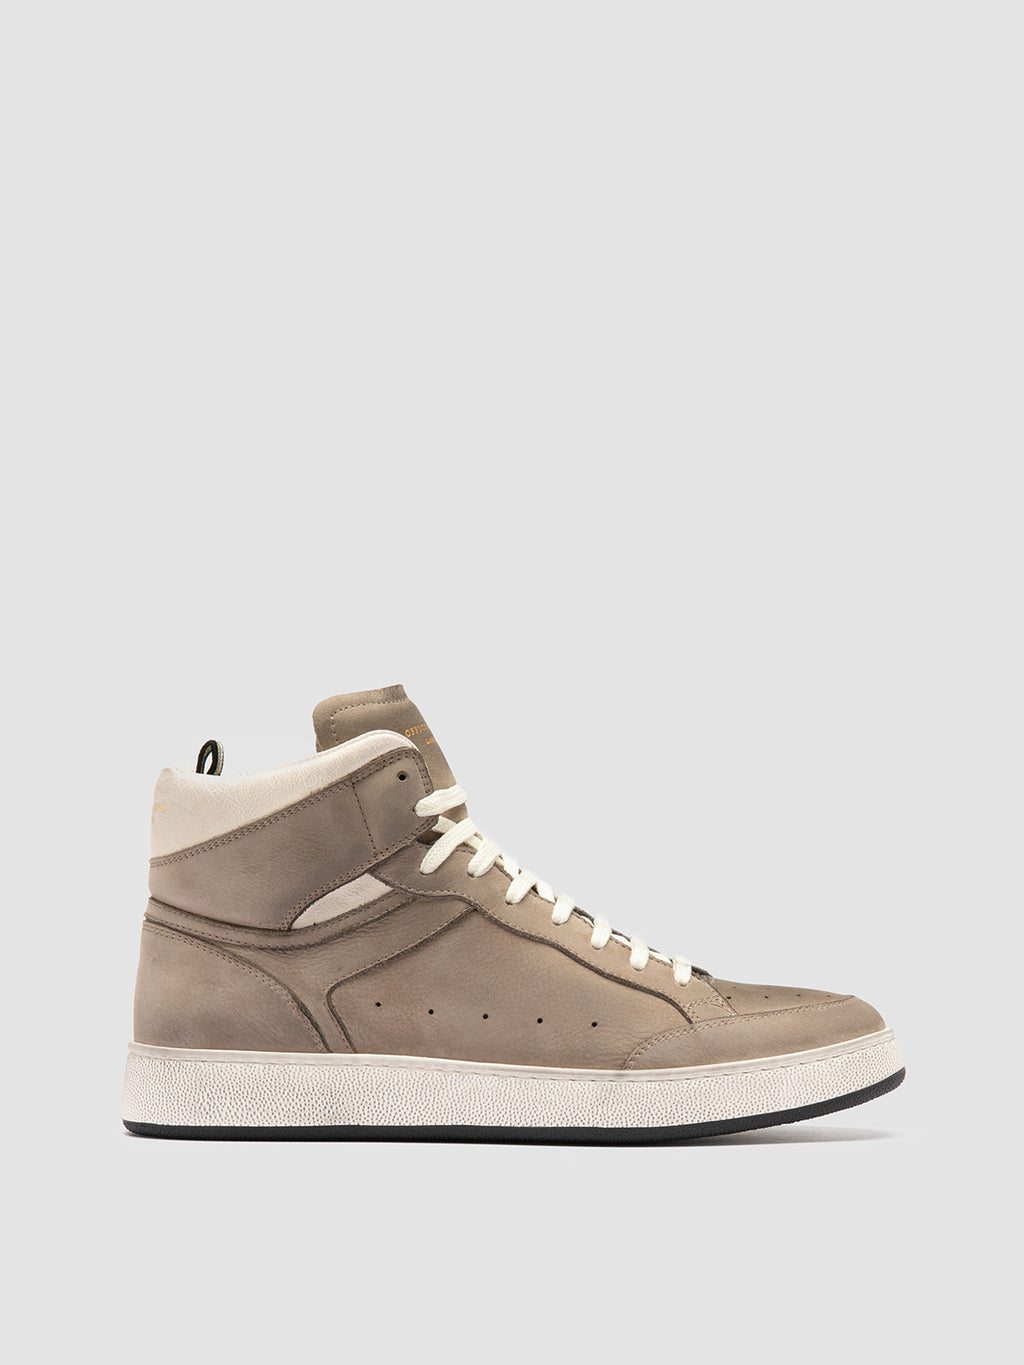 THE ANSWER 004 - Taupe Leather and Suede High Top Sneakers